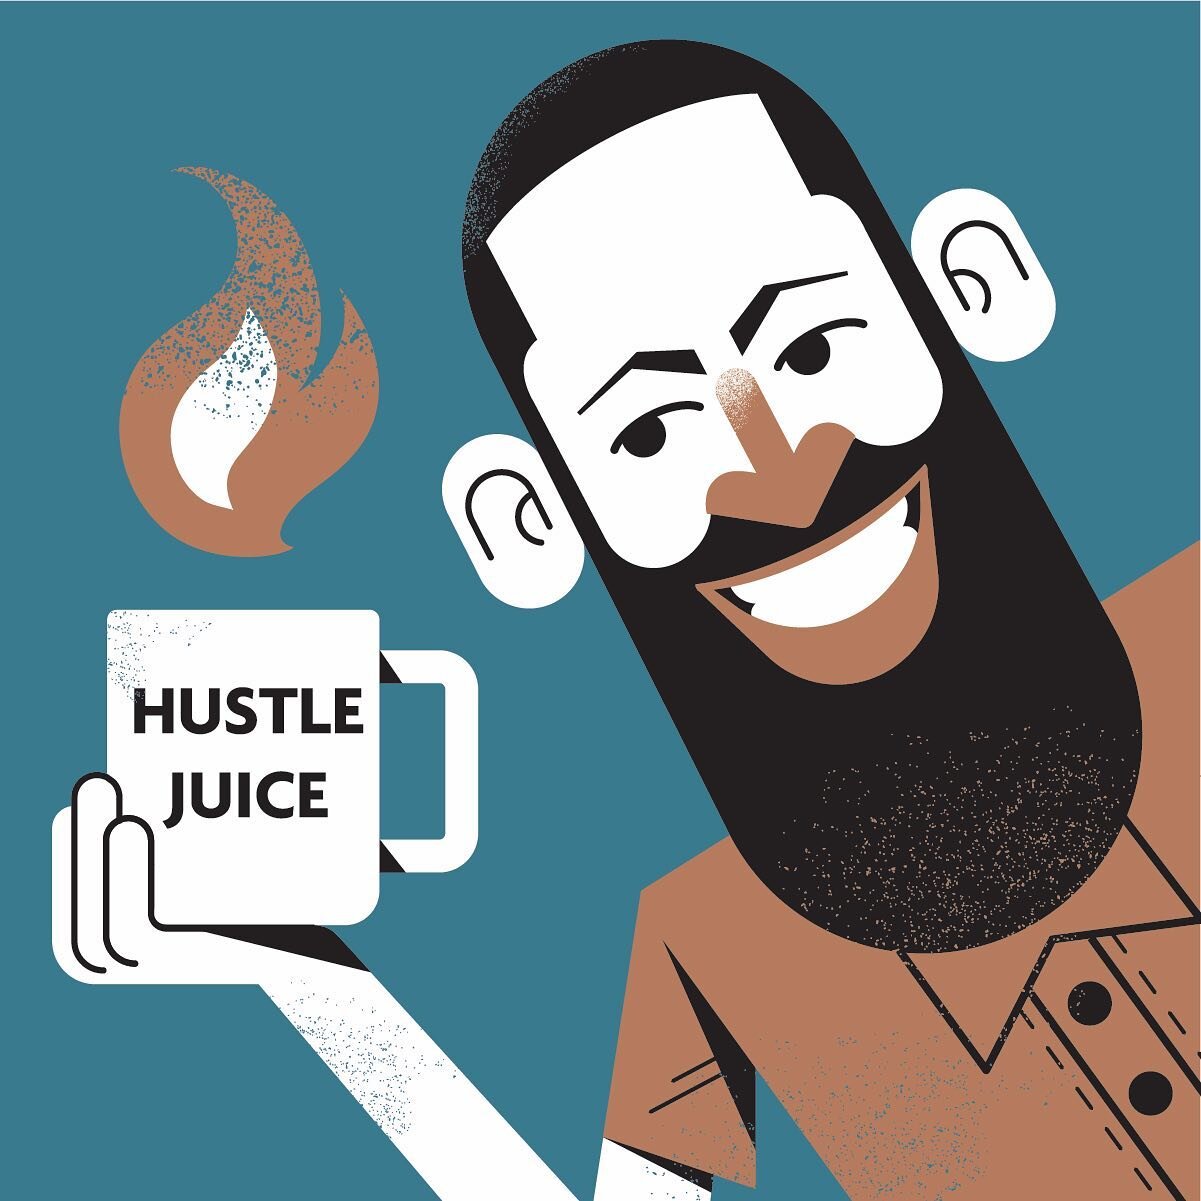 AAGD&rsquo;s Russell Toynes is an Educator, Mentor, Moderator, and Content Creator for AAGD&rsquo;s Facebook page. #aagd #chuckscott #africanamericandesigner #illustrations #avatar #profile #portrait #caricature #chuck_doodles #adobeillustrators #aut